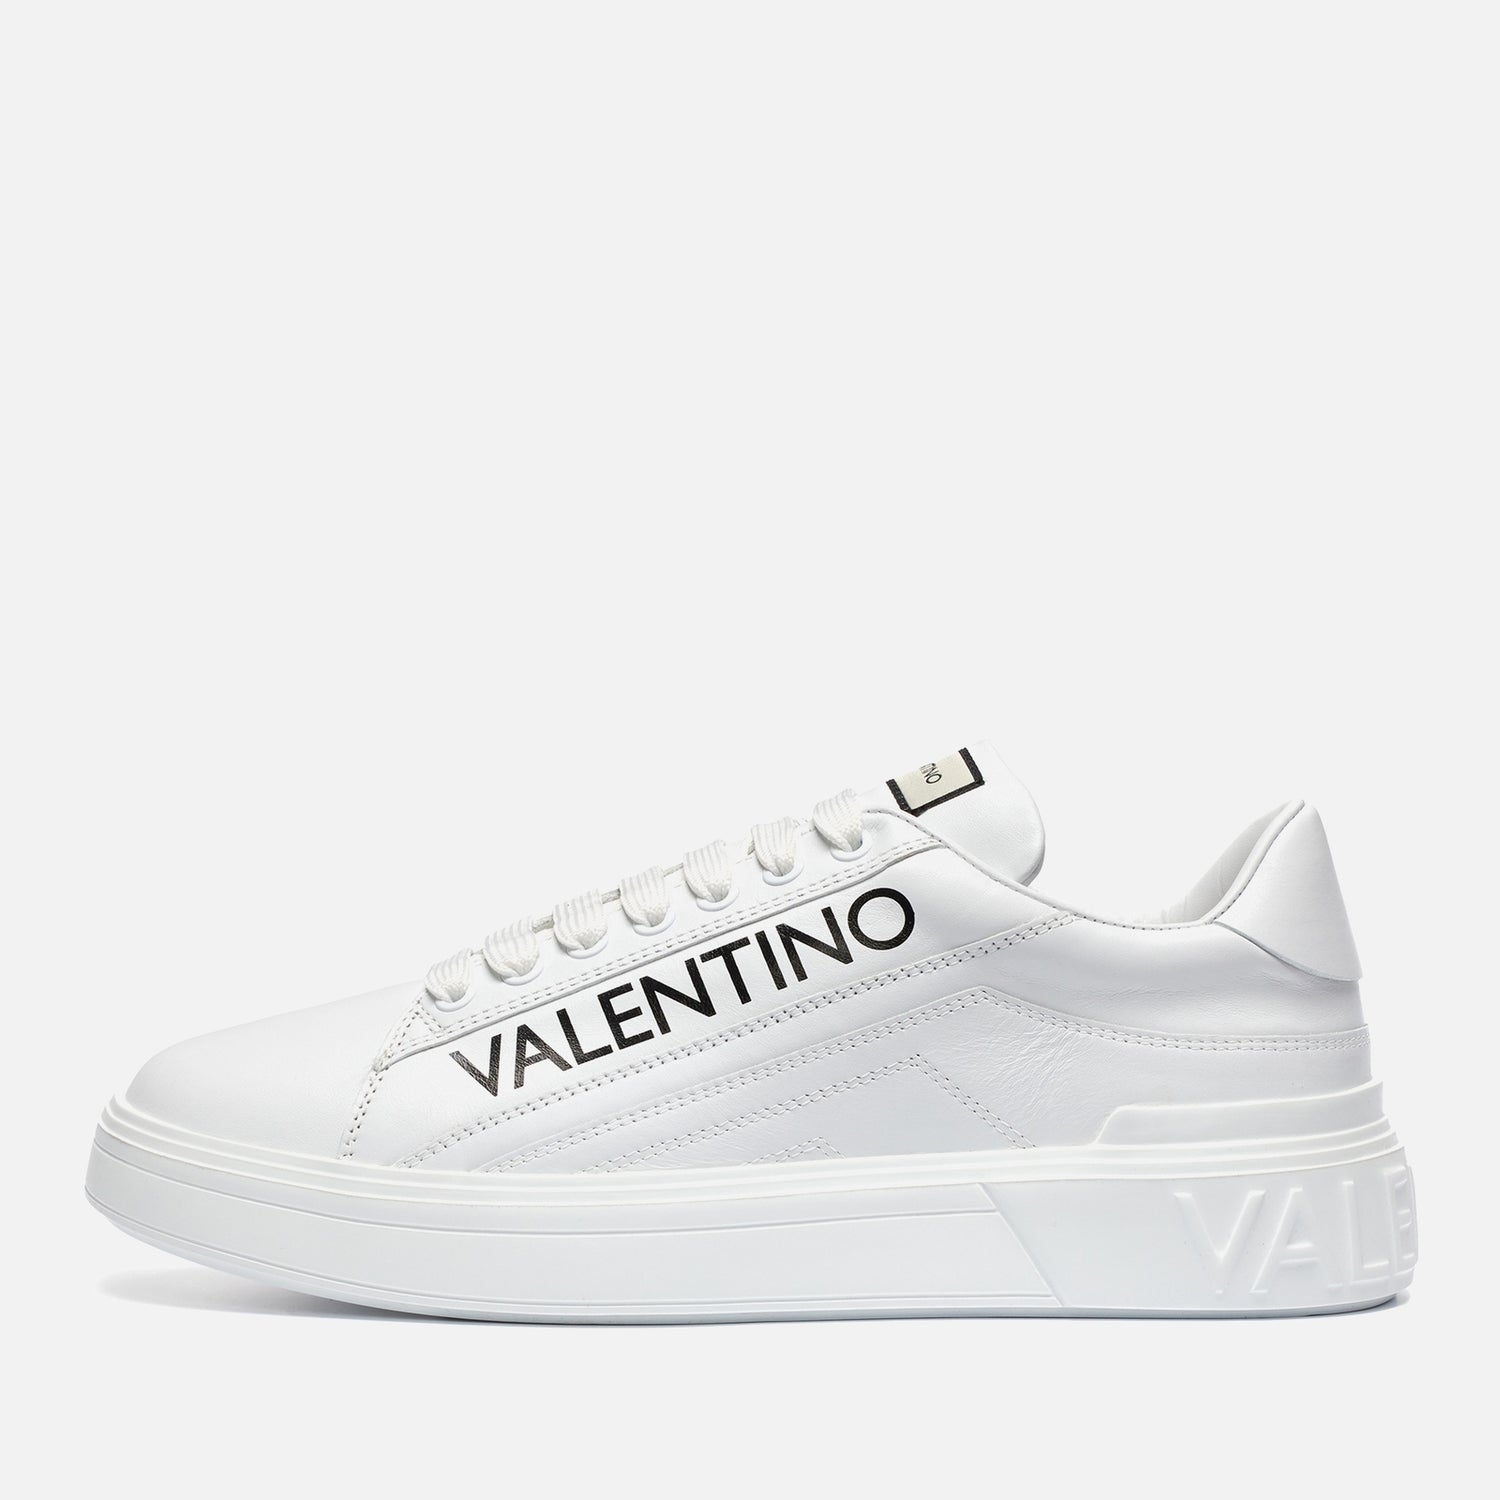 Valentino Men's Rey Leather Low Top Trainers - White/Black - 7